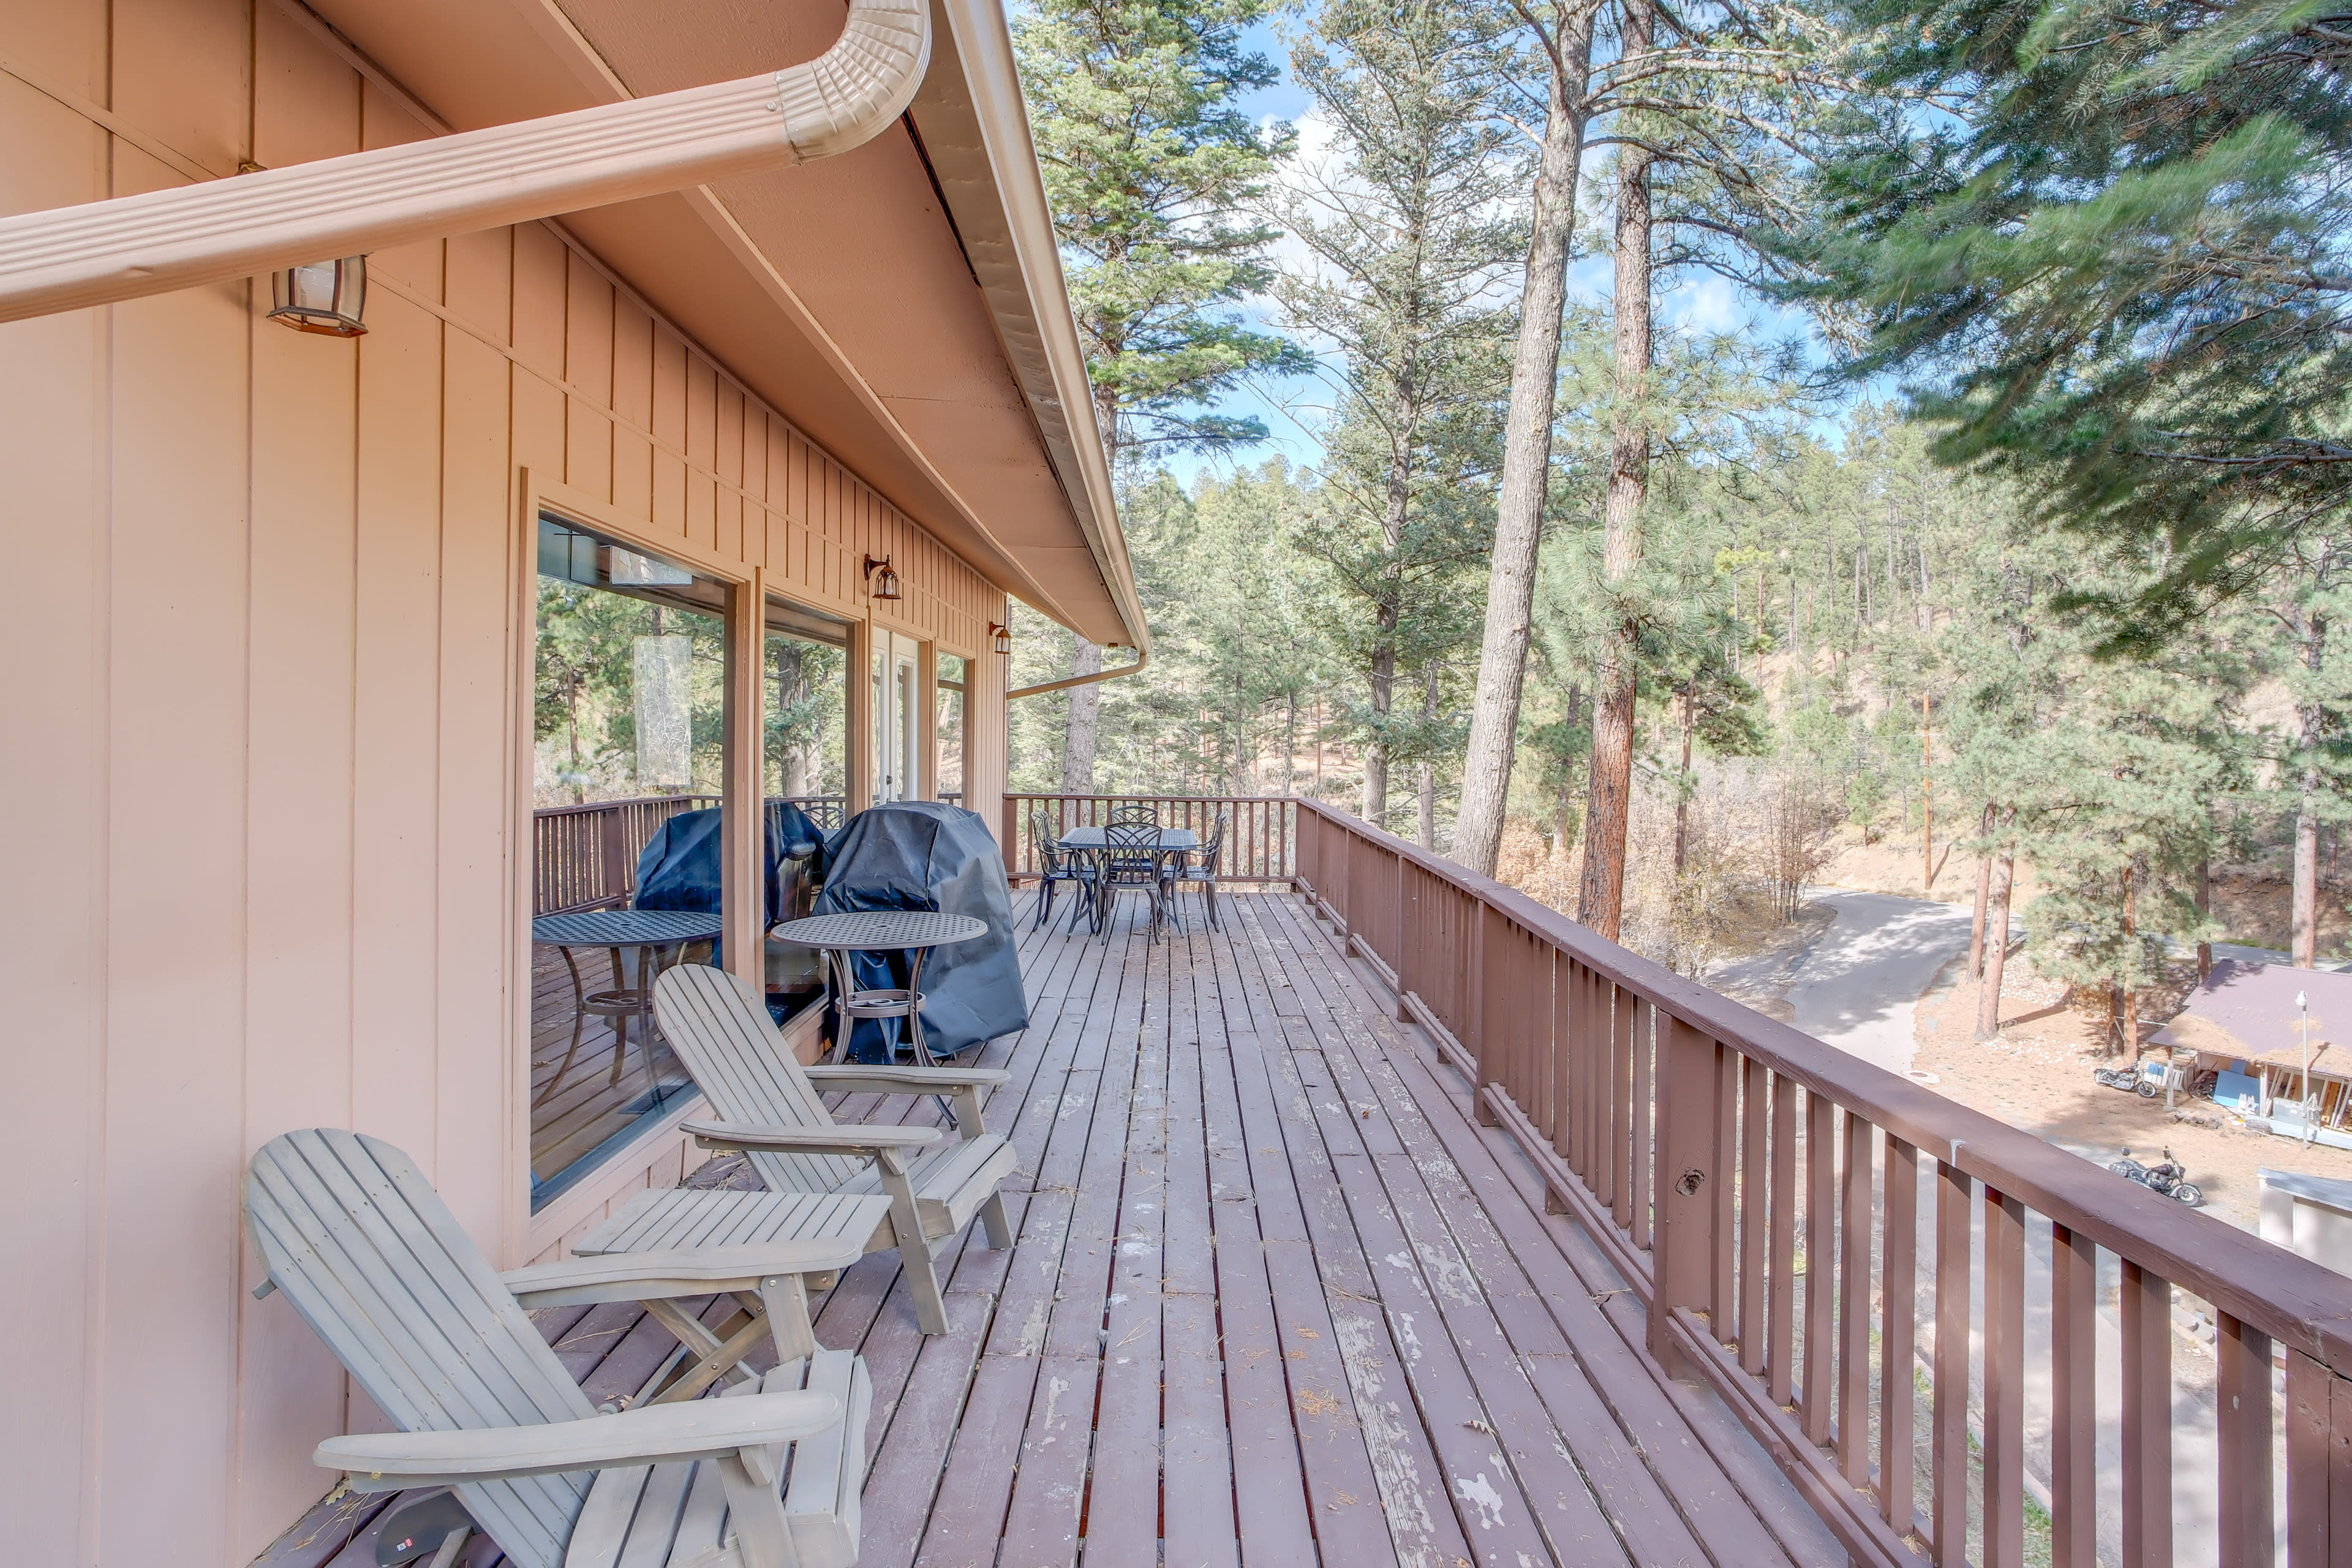 3 Decks | Forest Views | Outdoor Dining Area | Private Hot Tub